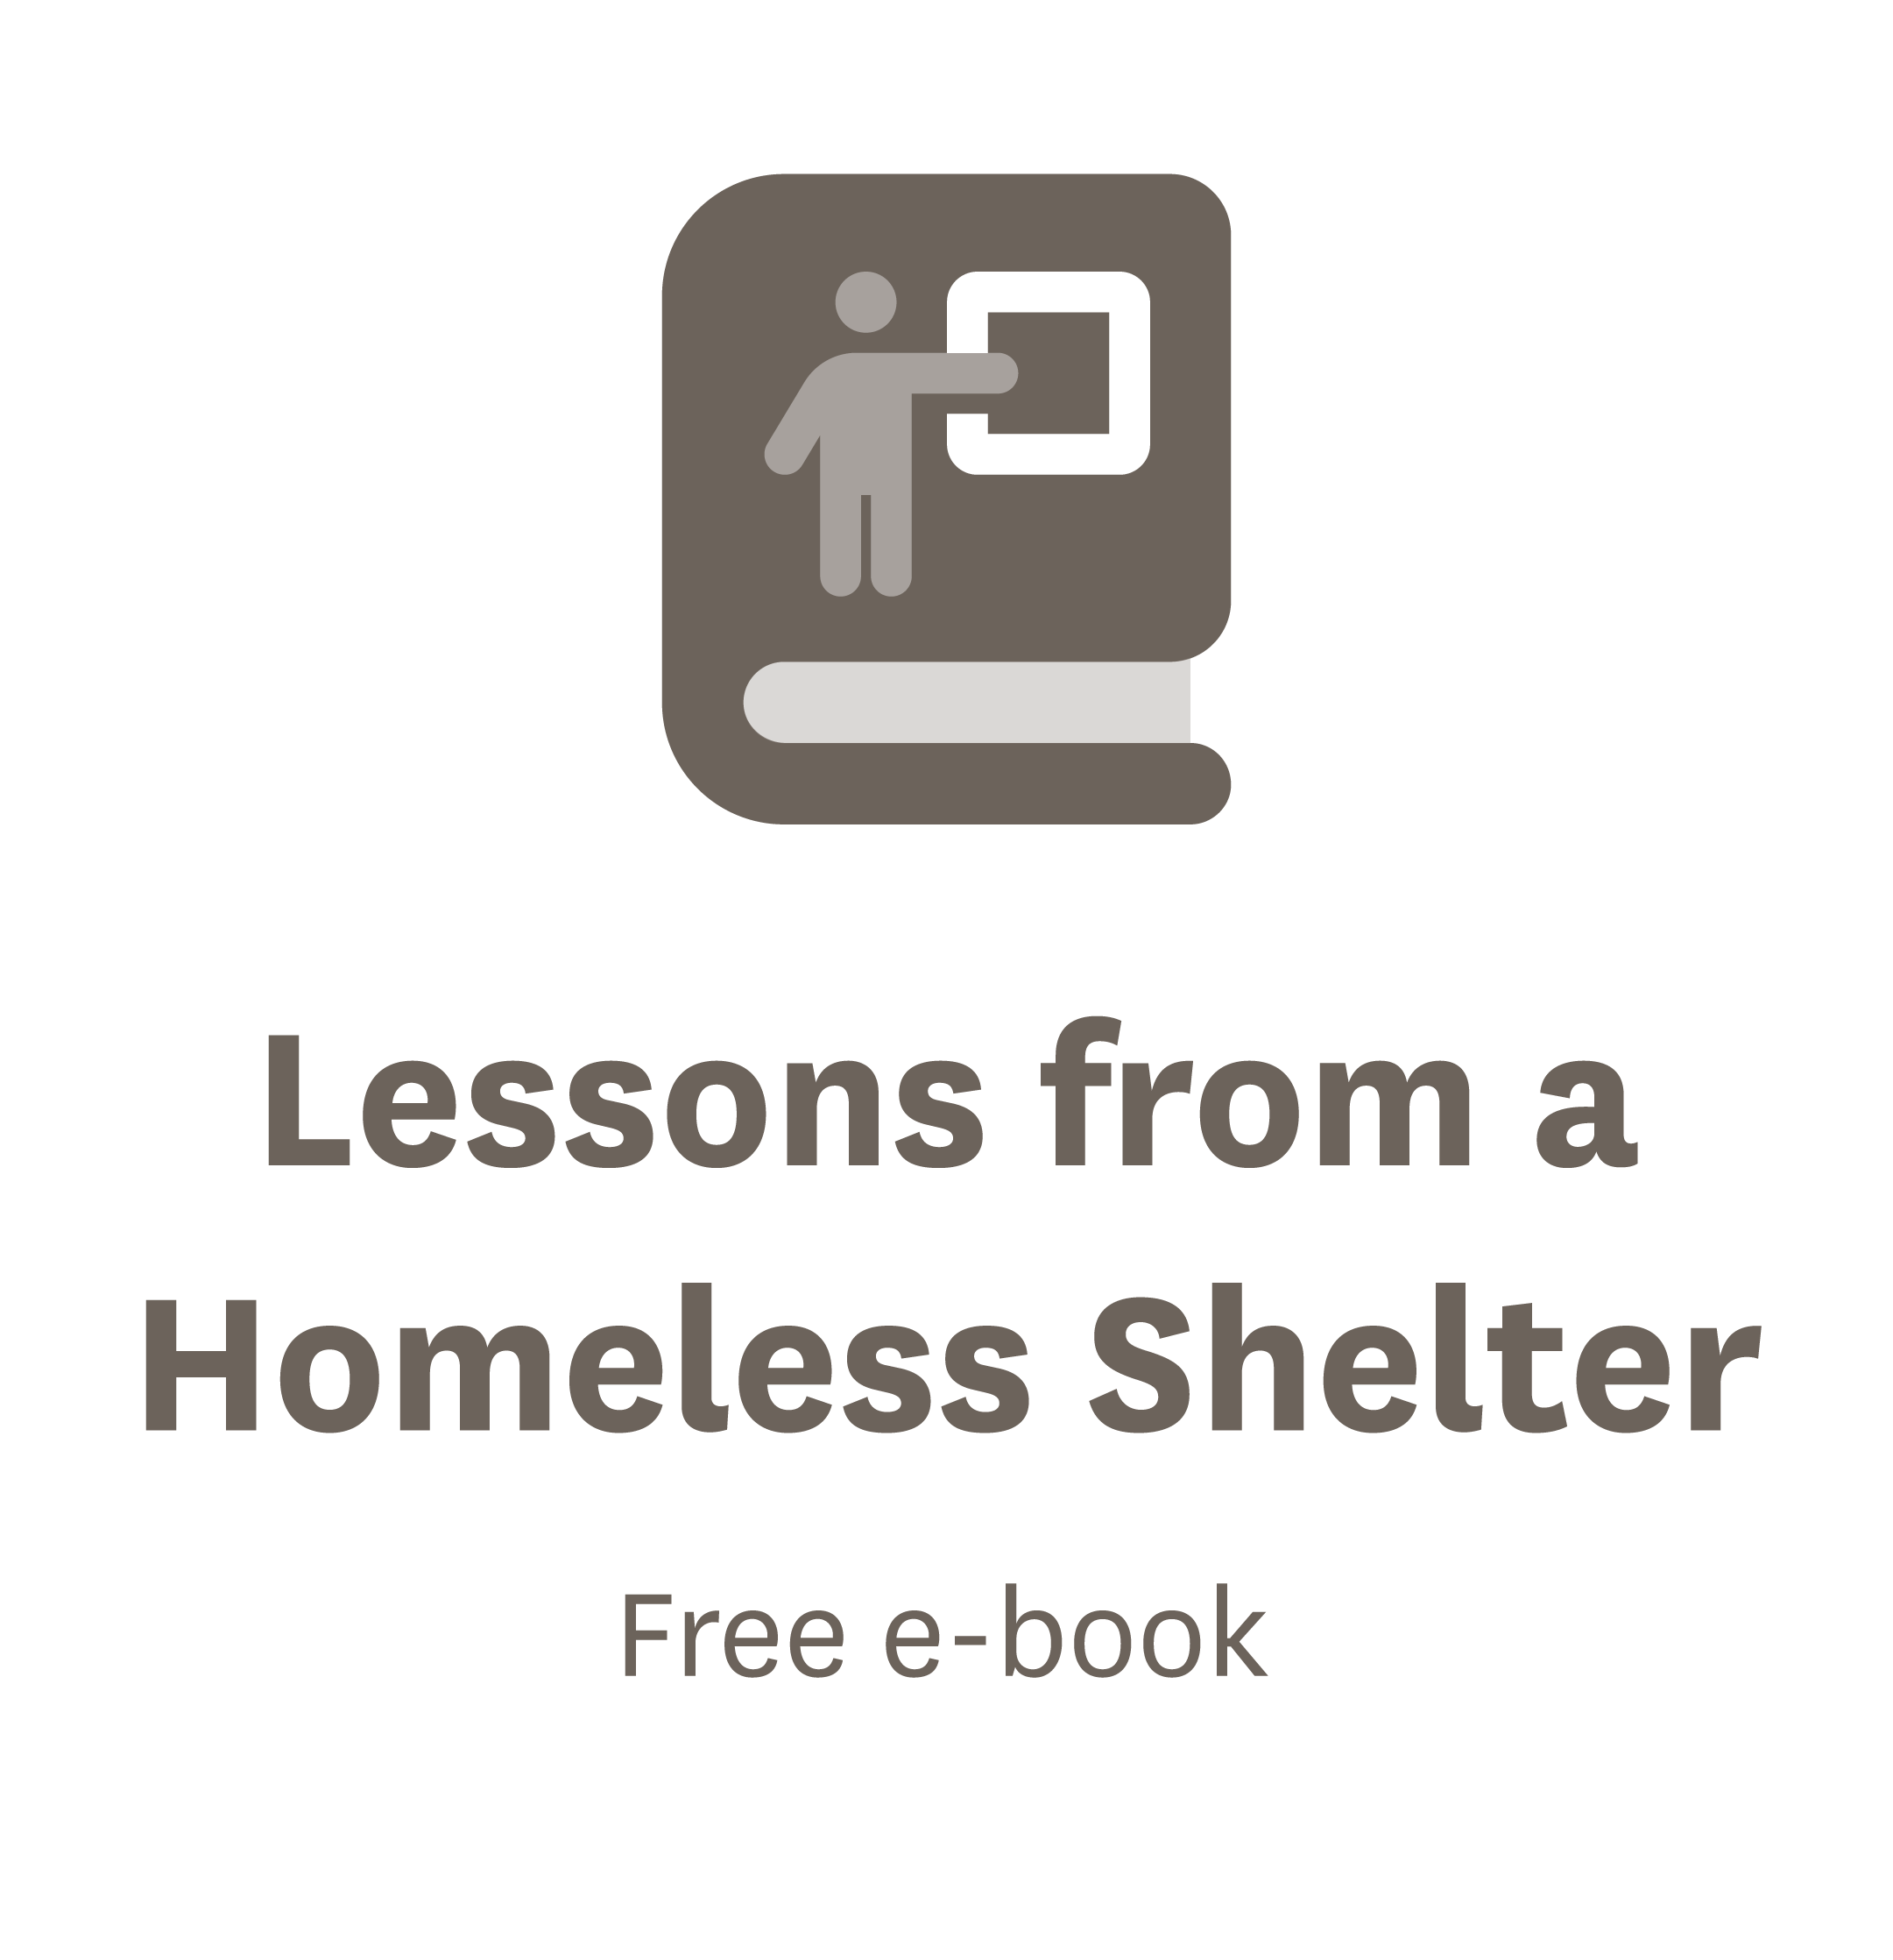 Free e-book - Lessons from a Homeless Shelter